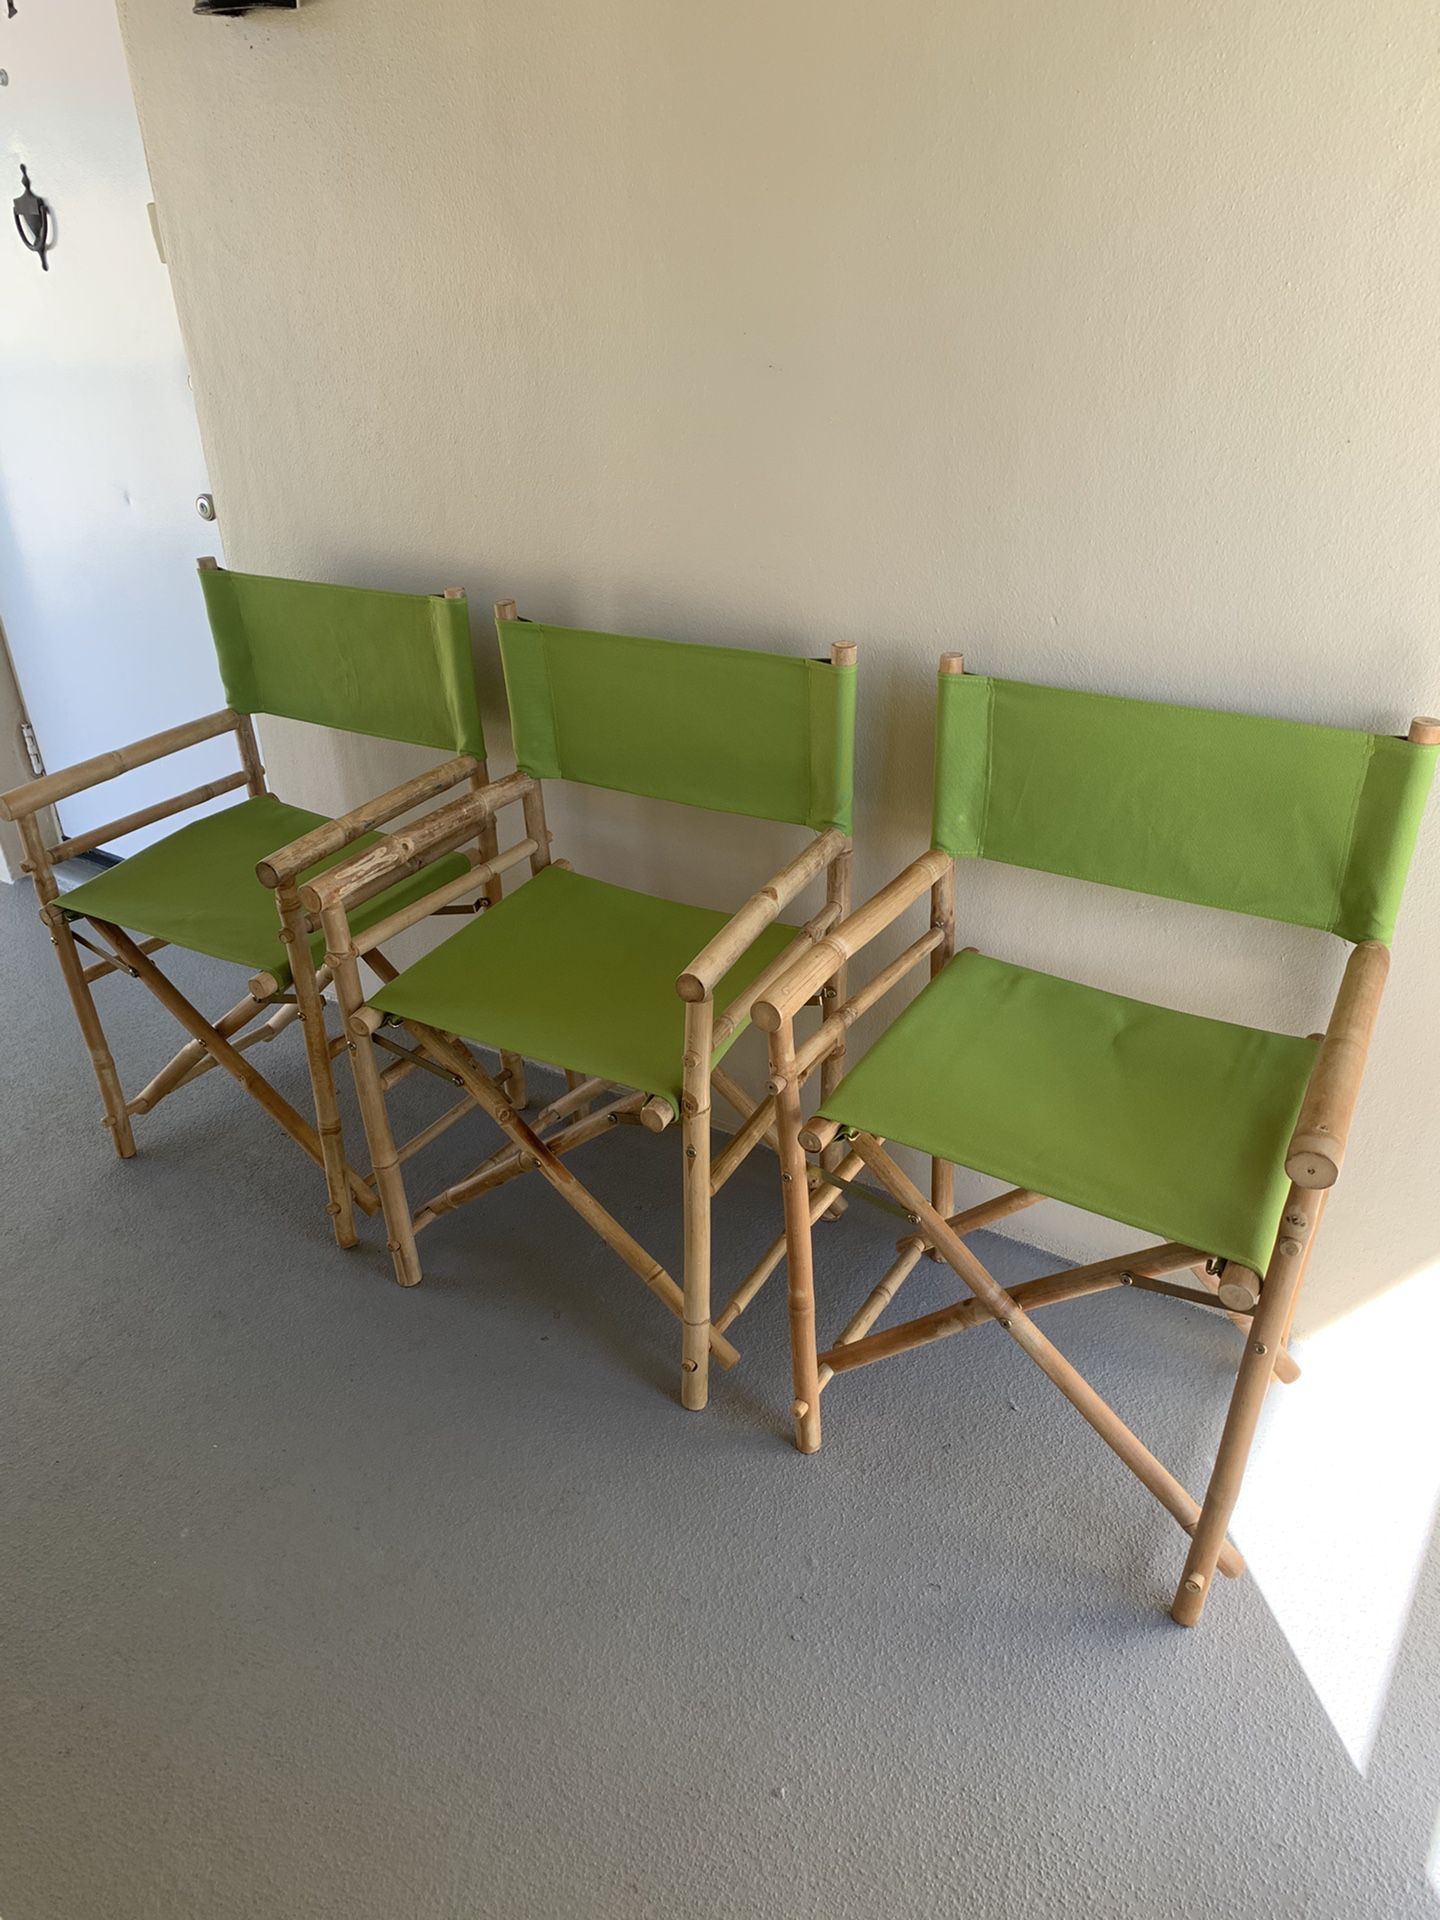 3 All bamboo directors chairs